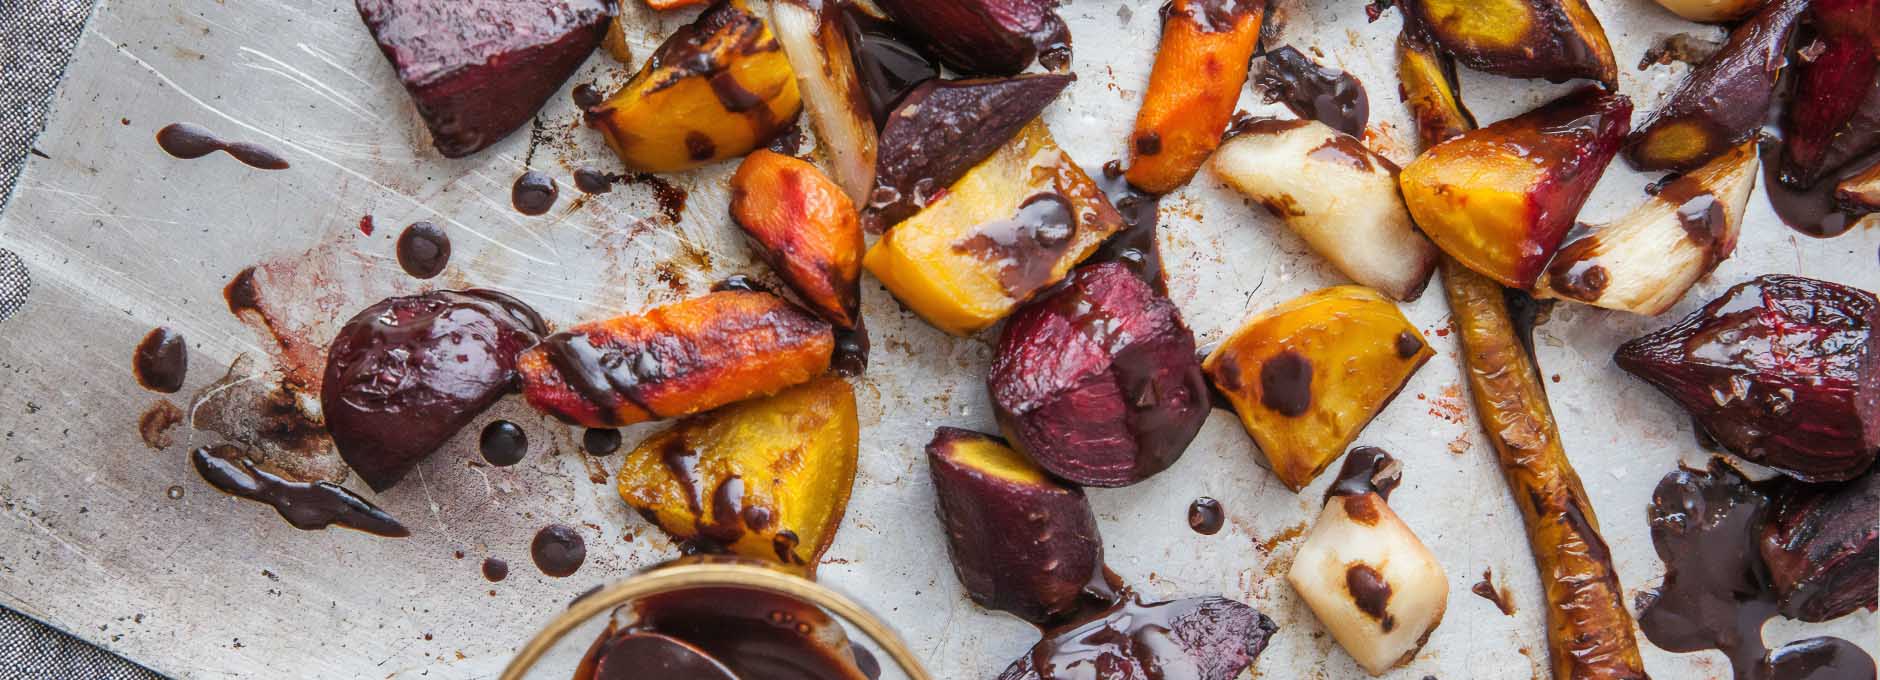 roasted vegetables in a pan